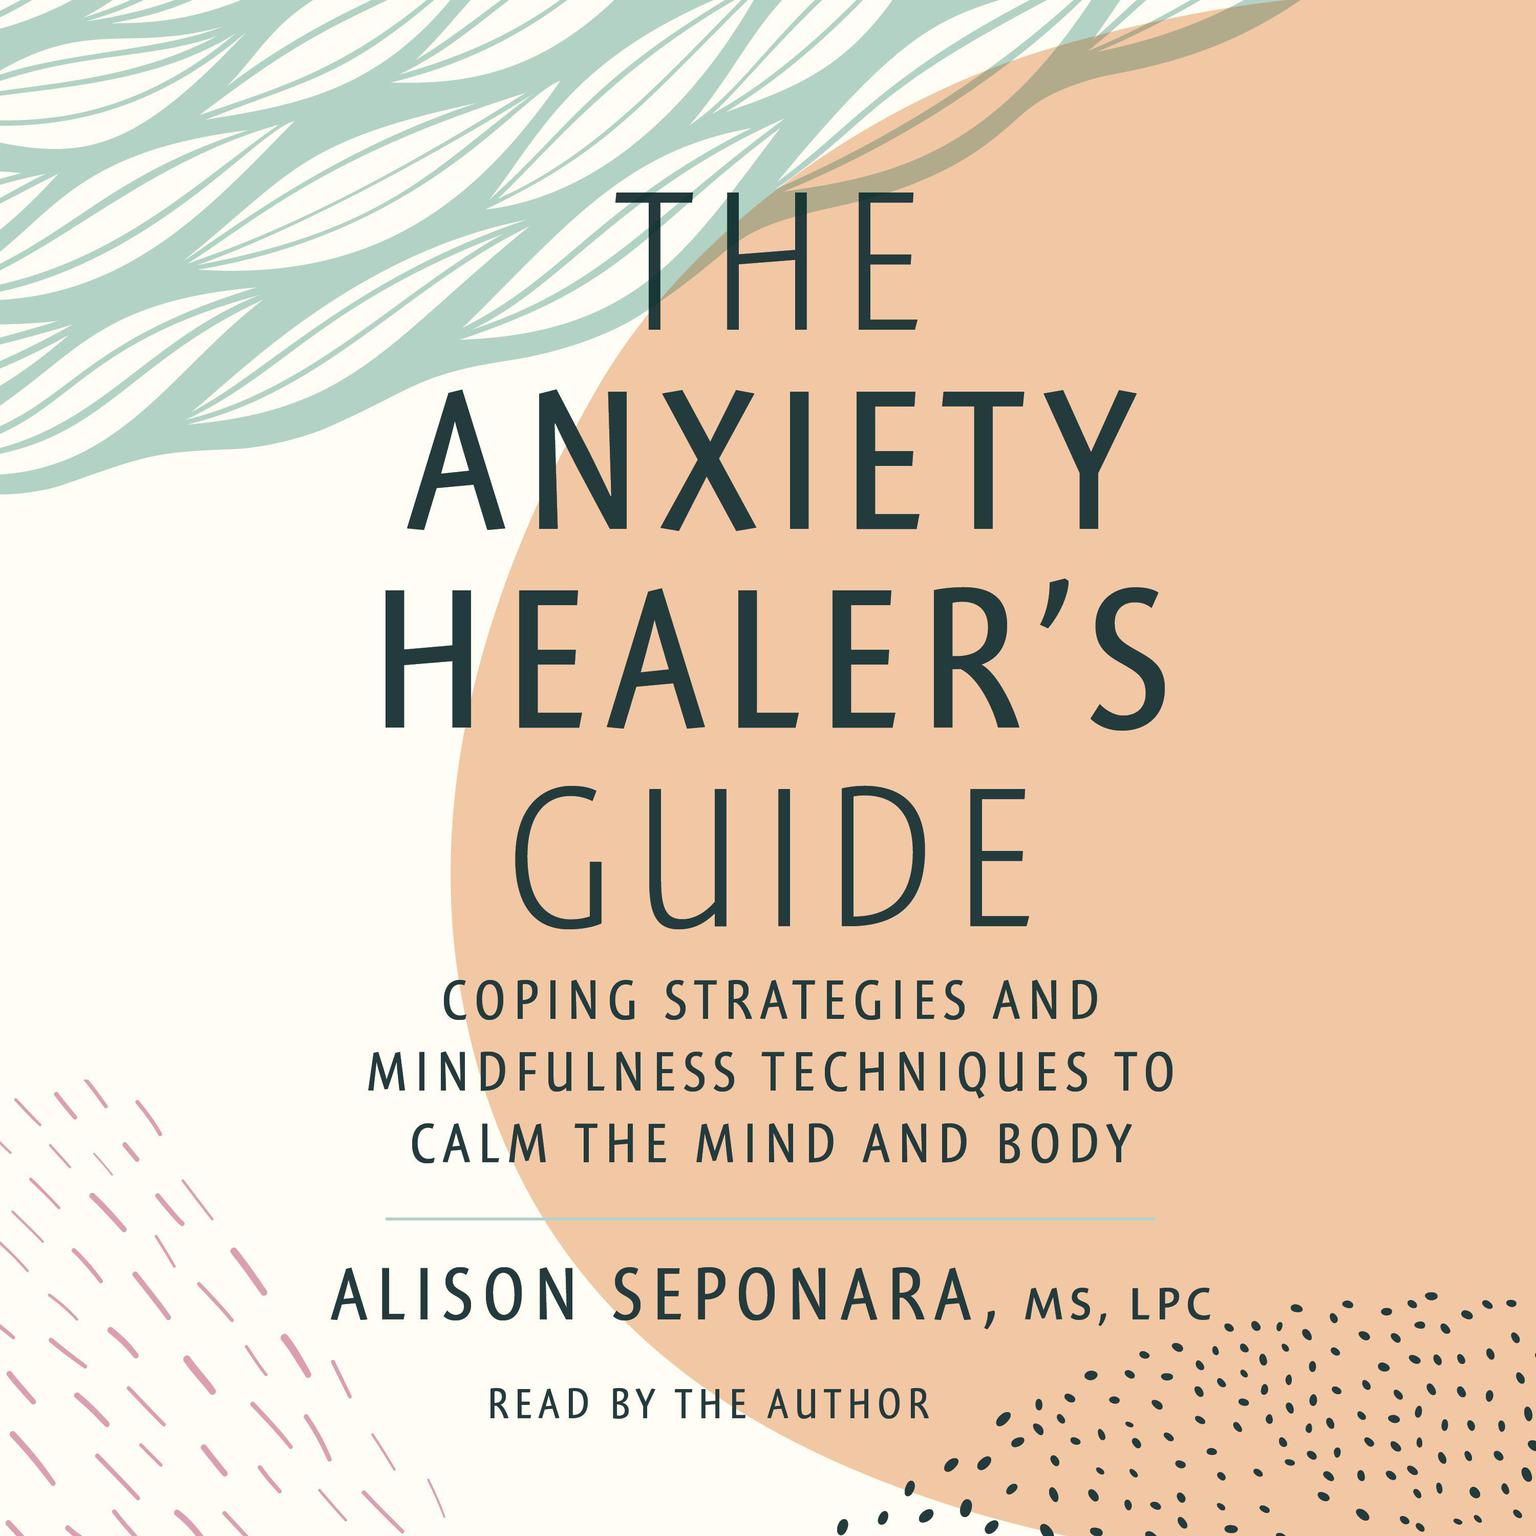 The Anxiety Healer’s Guide: Coping Strategies and Mindfulness Techniques to Calm the Mind and Body Audiobook, by Alison Seponara